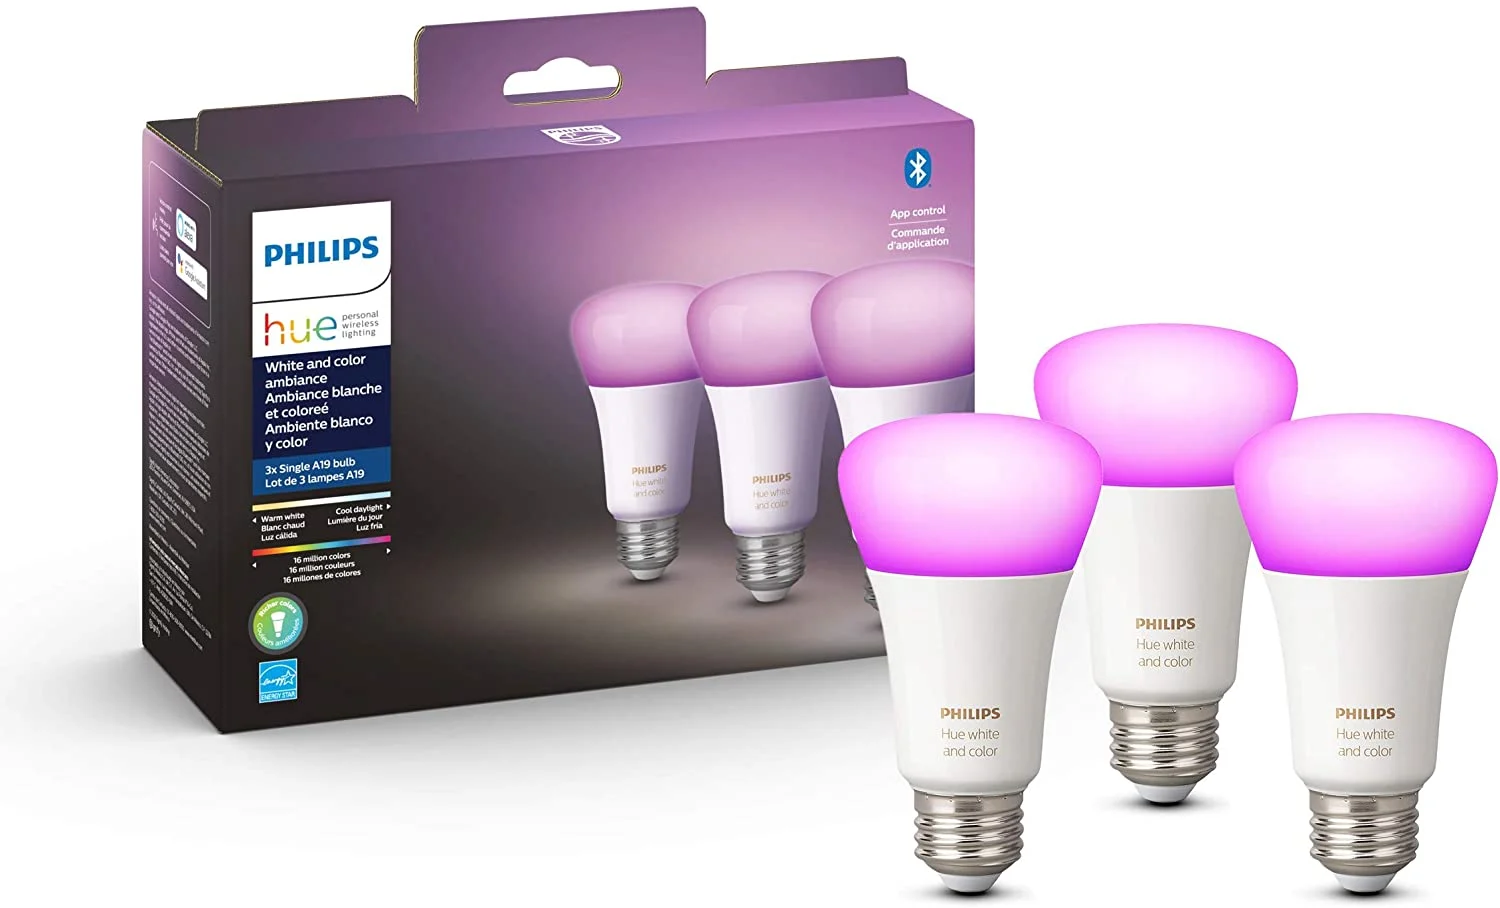 Amazon drops the price of Philips Hue products in early Black Friday sale